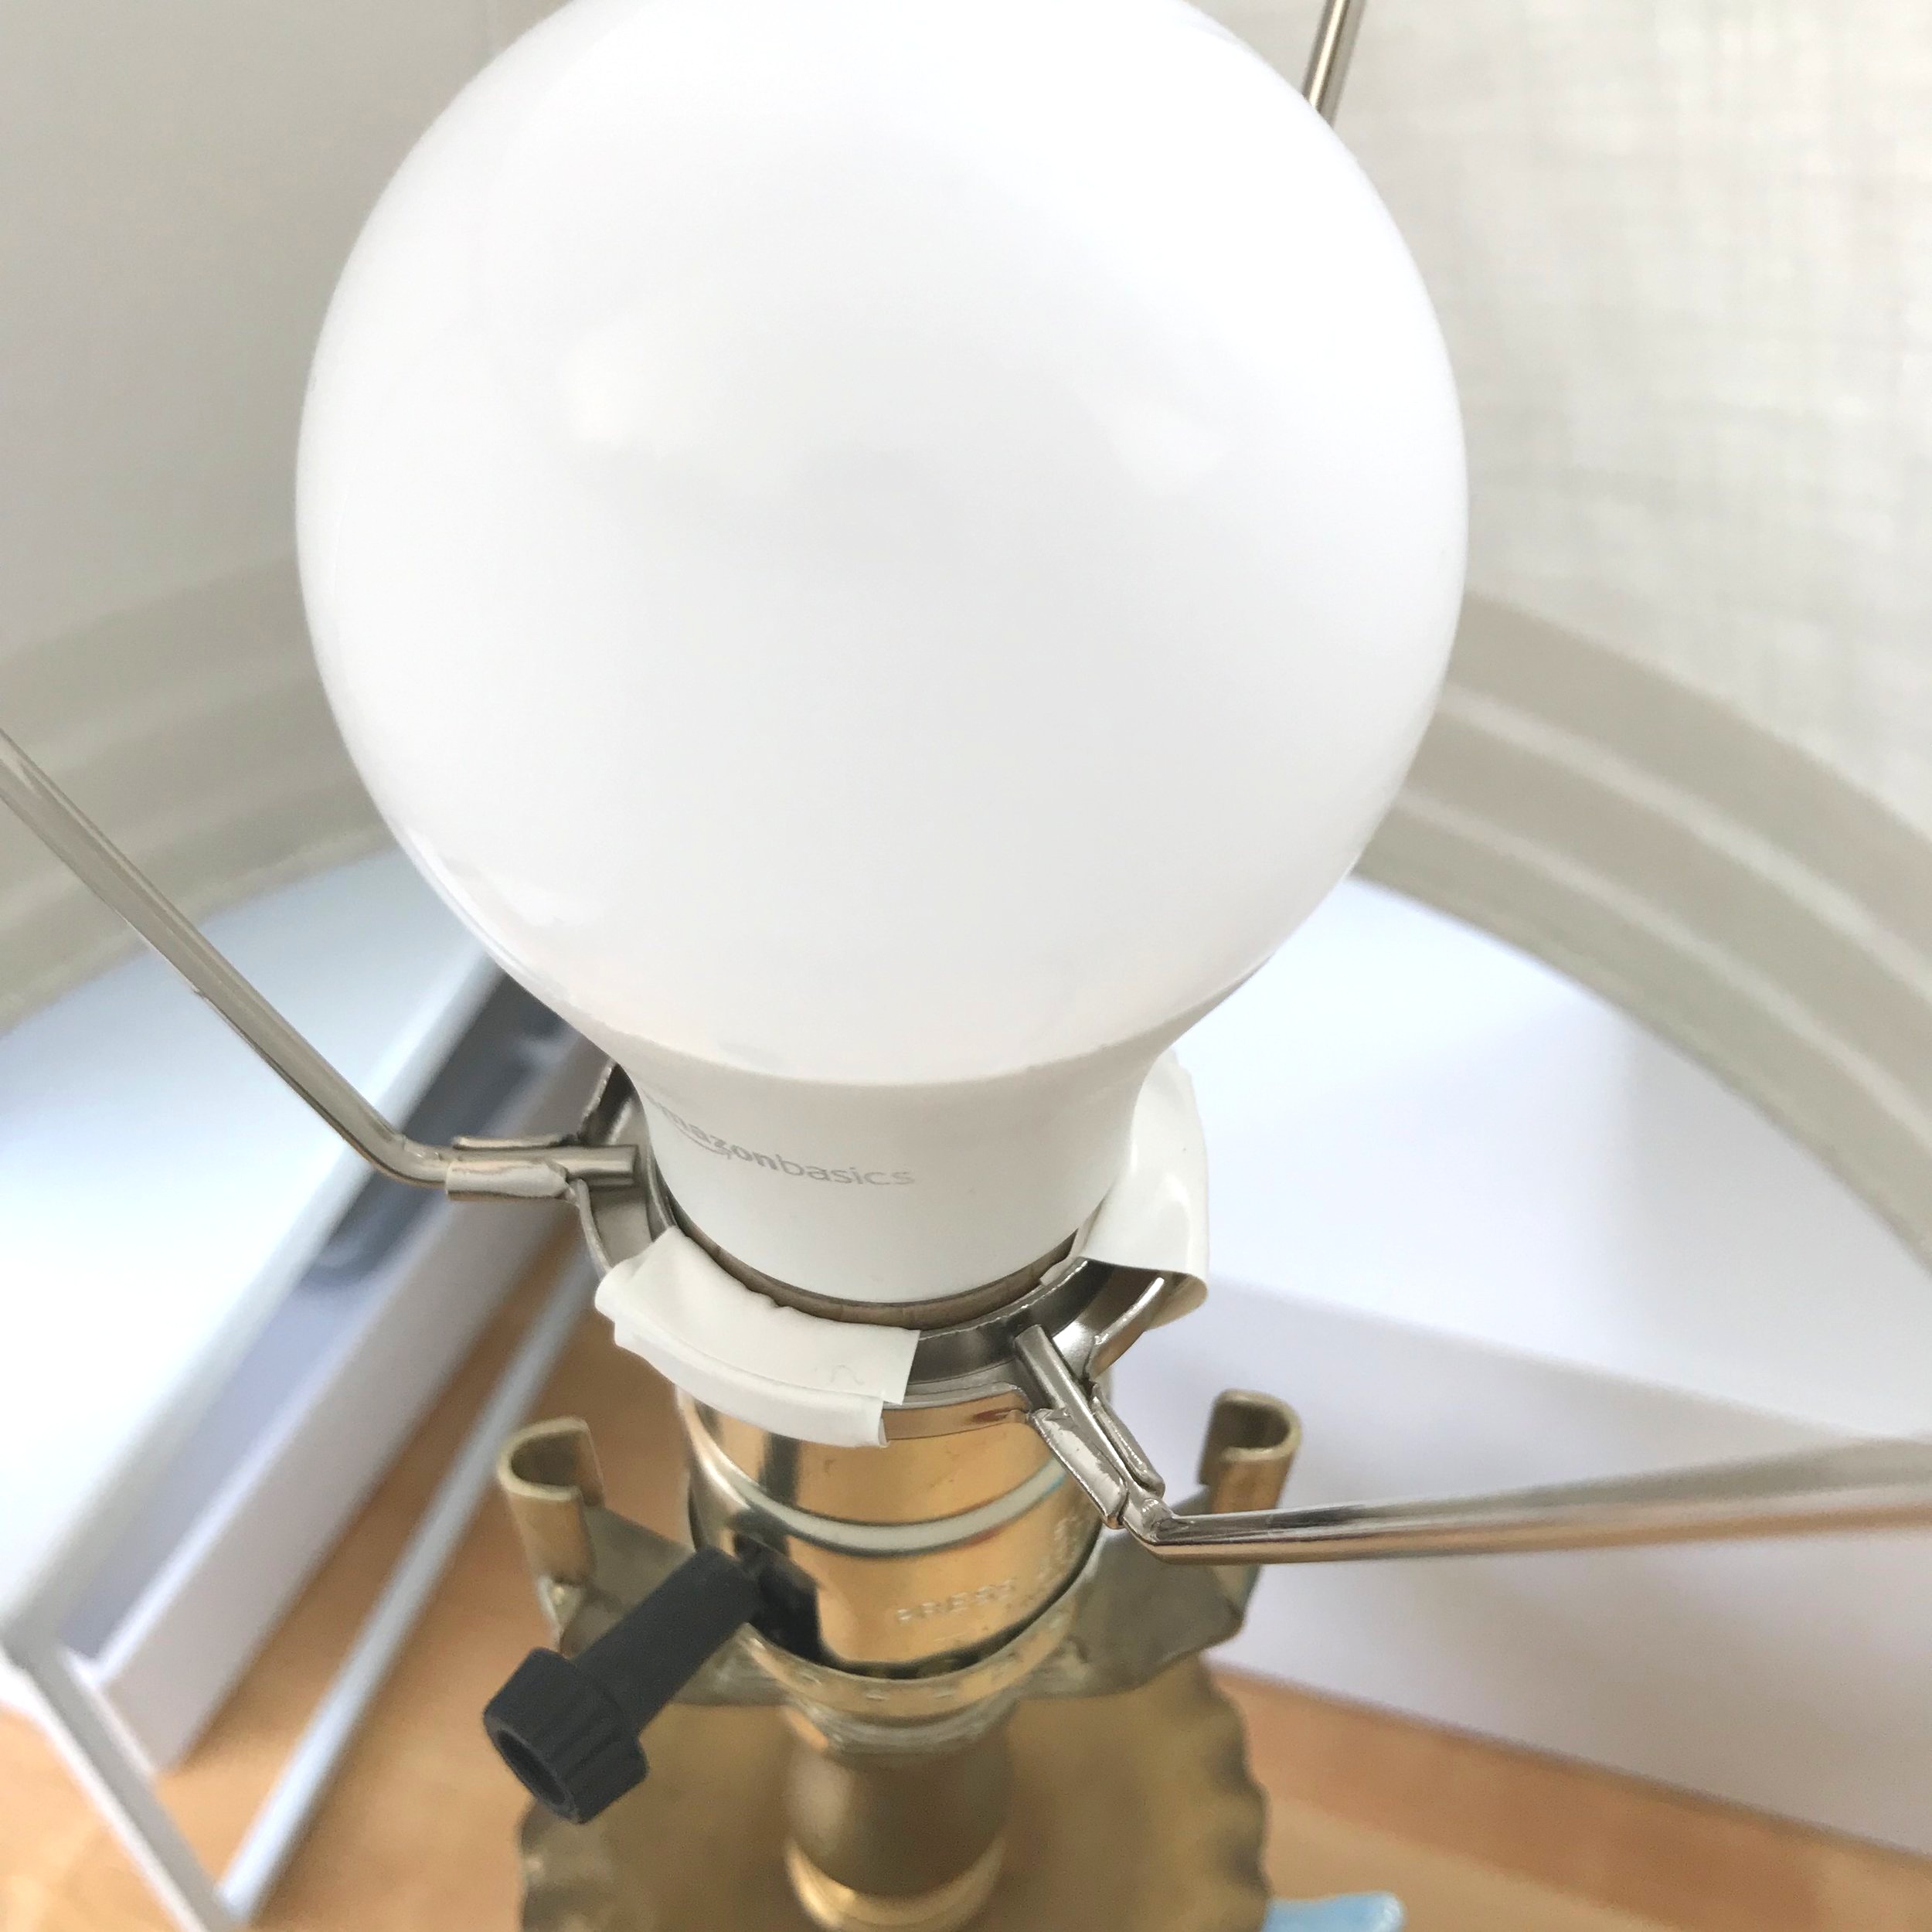 How To Make A Lamp Shade Ring Fit, How To Fix A Wobbly Table Lamp